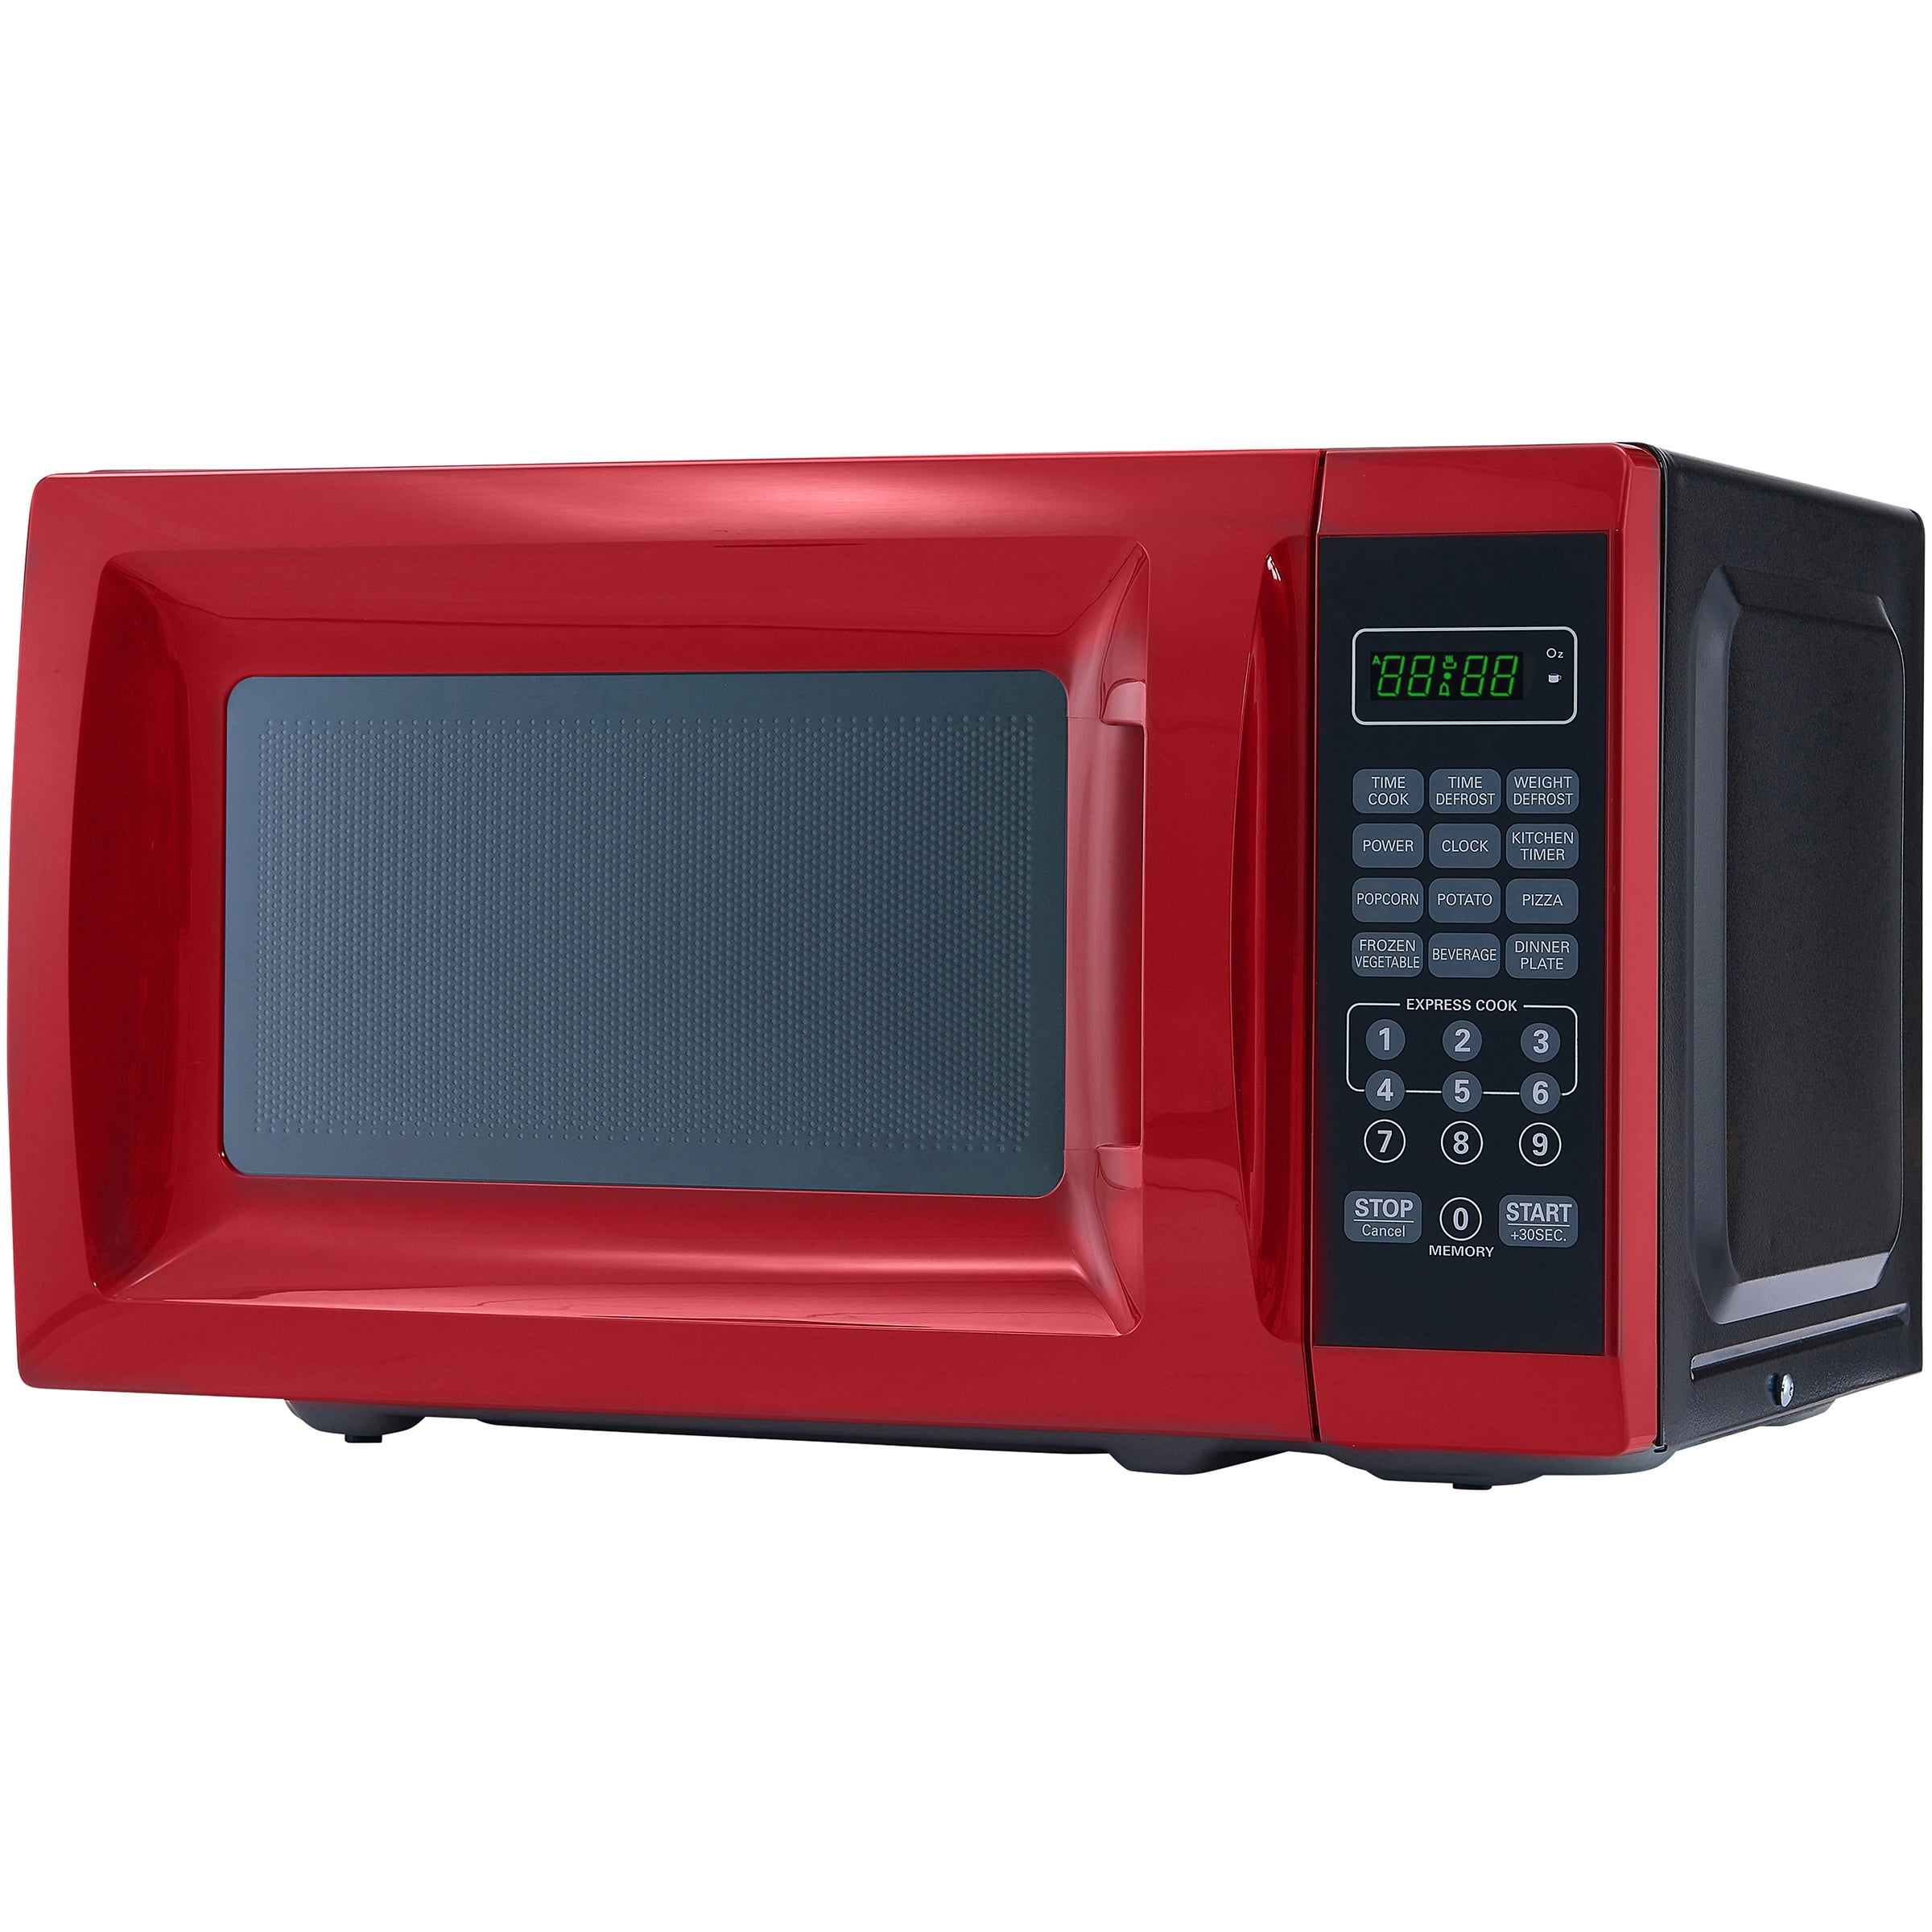 Mainstays 0.7 Cu. Ft. 700W Red Microwave Oven 